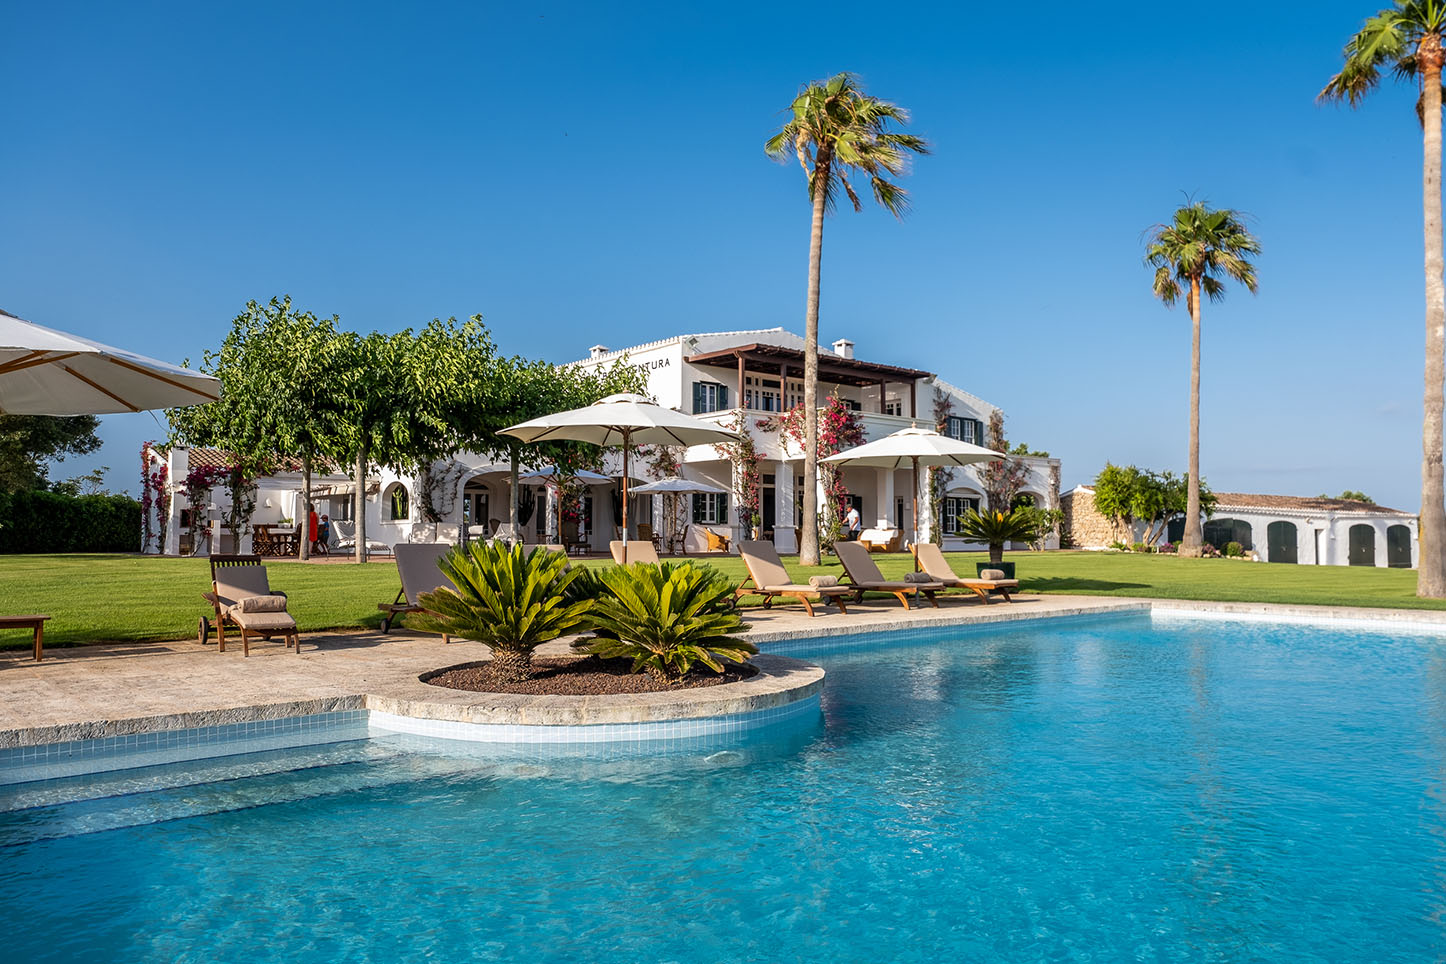 Ultra luxury villa to rent in menorca. Past guests include Michelle Obama.